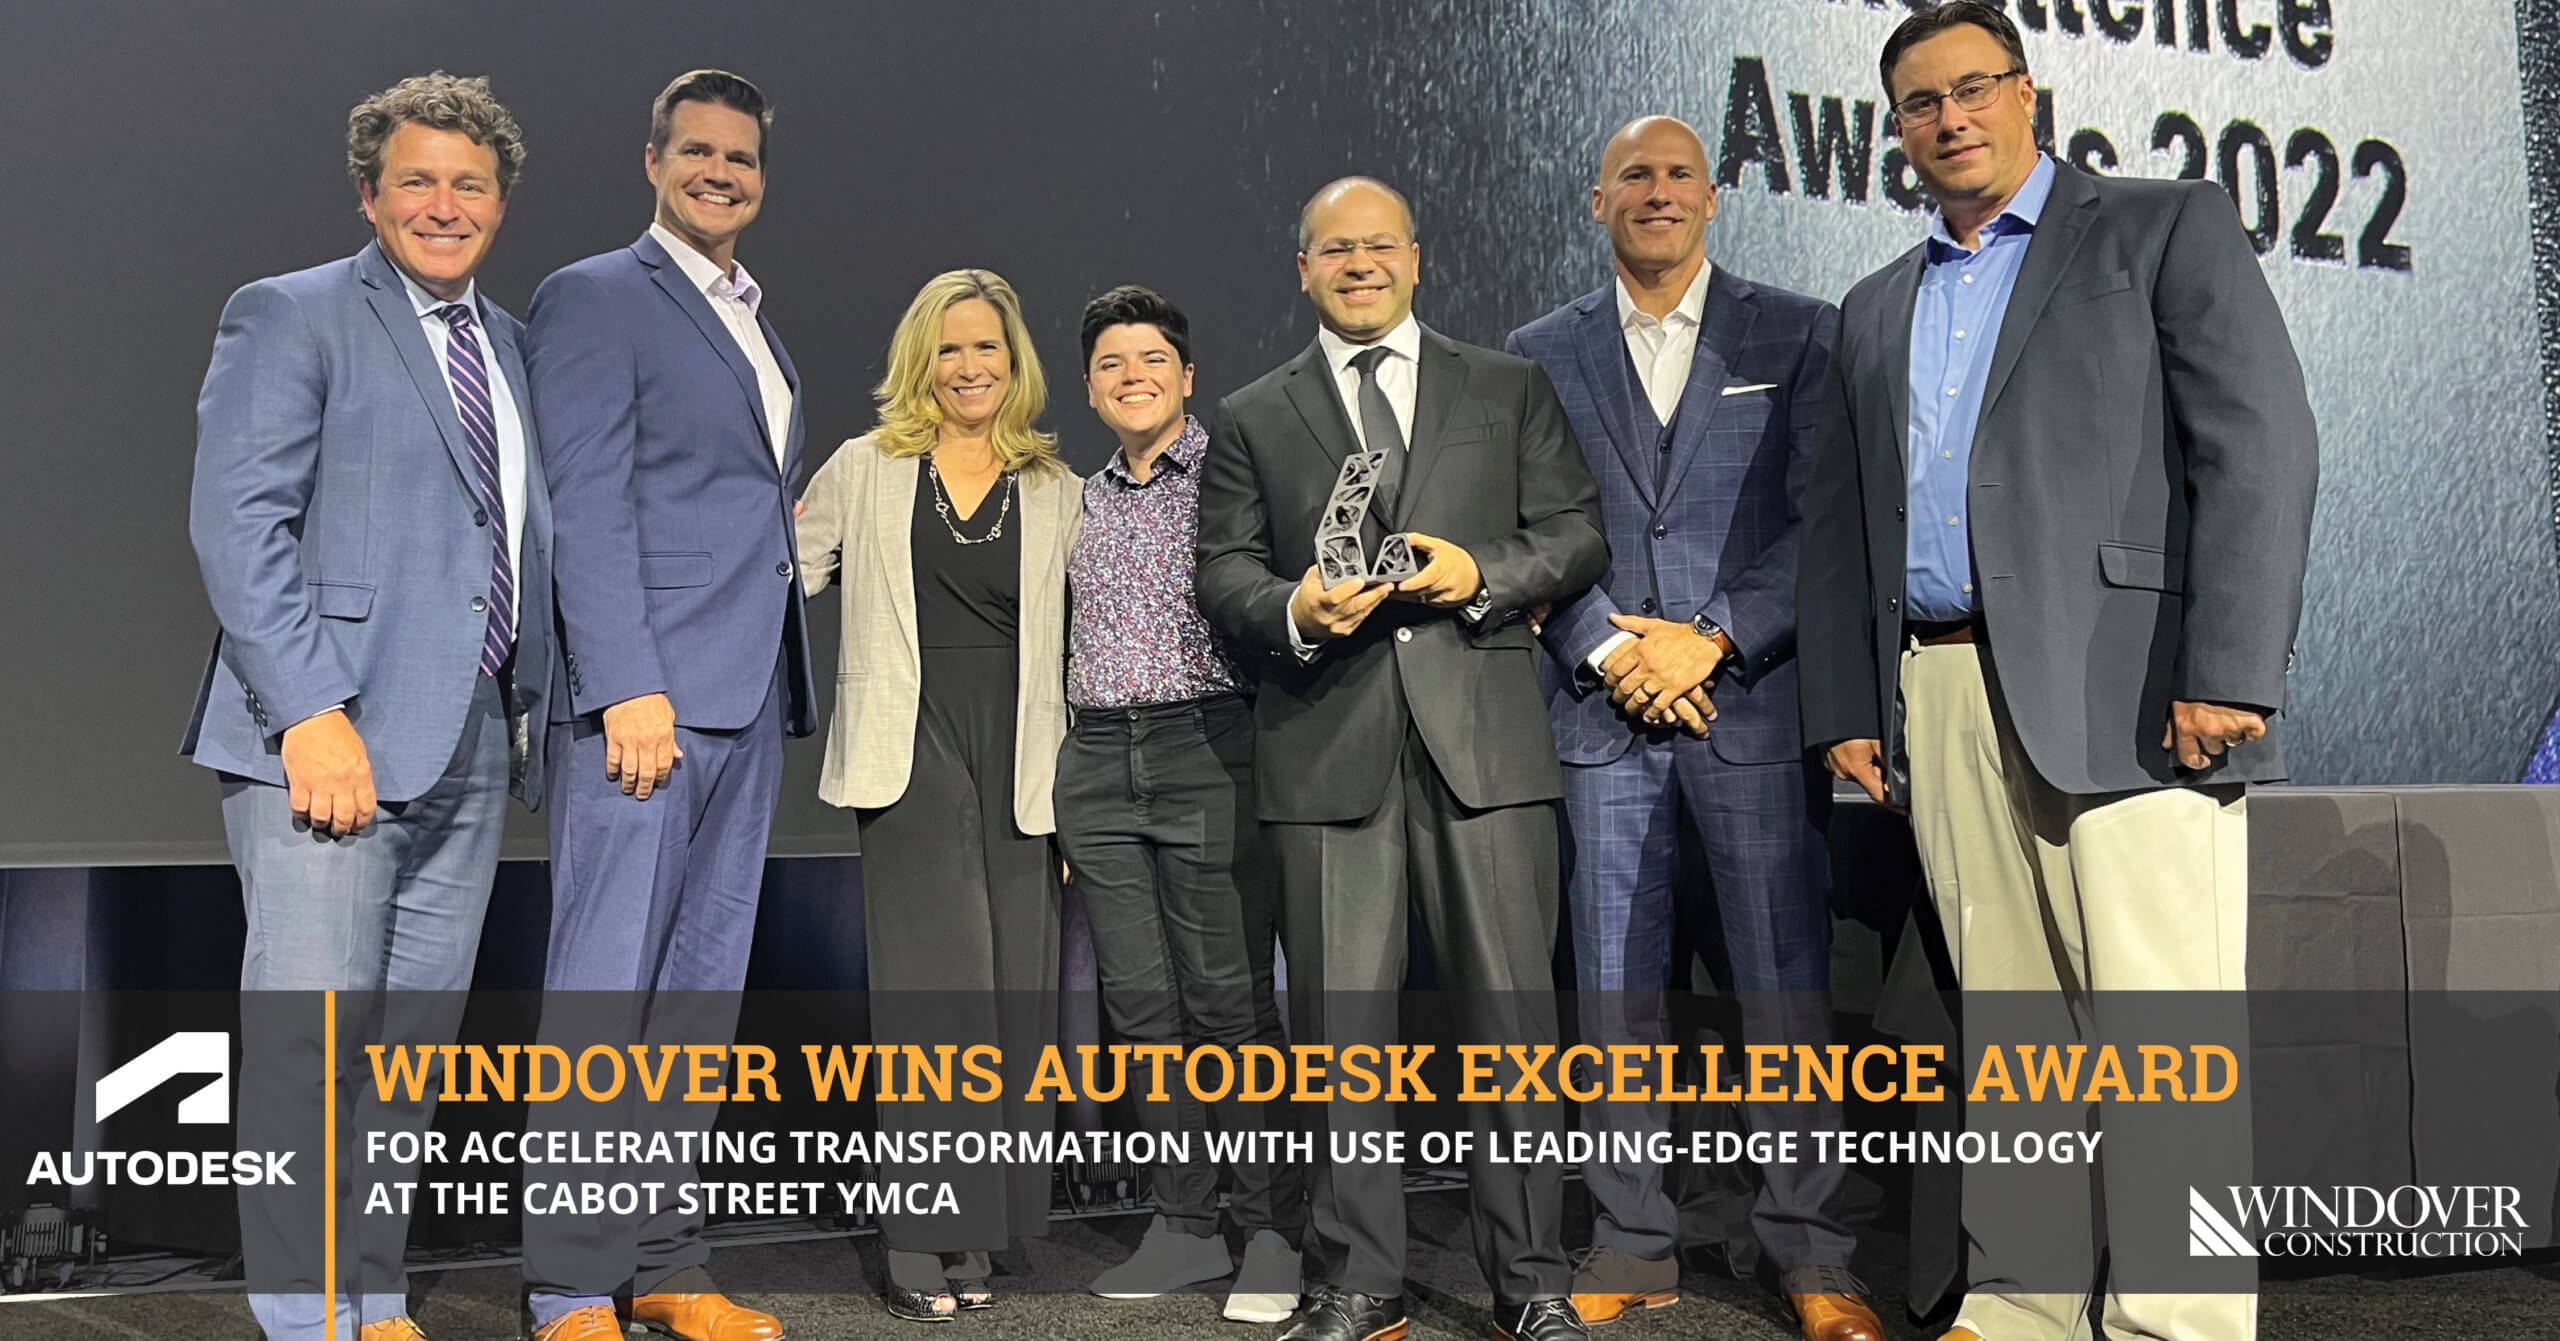 Windover Construction Wins Autodesk Excellence Award, Recognized for 2nd Time as a Global Leader in Construction Innovation